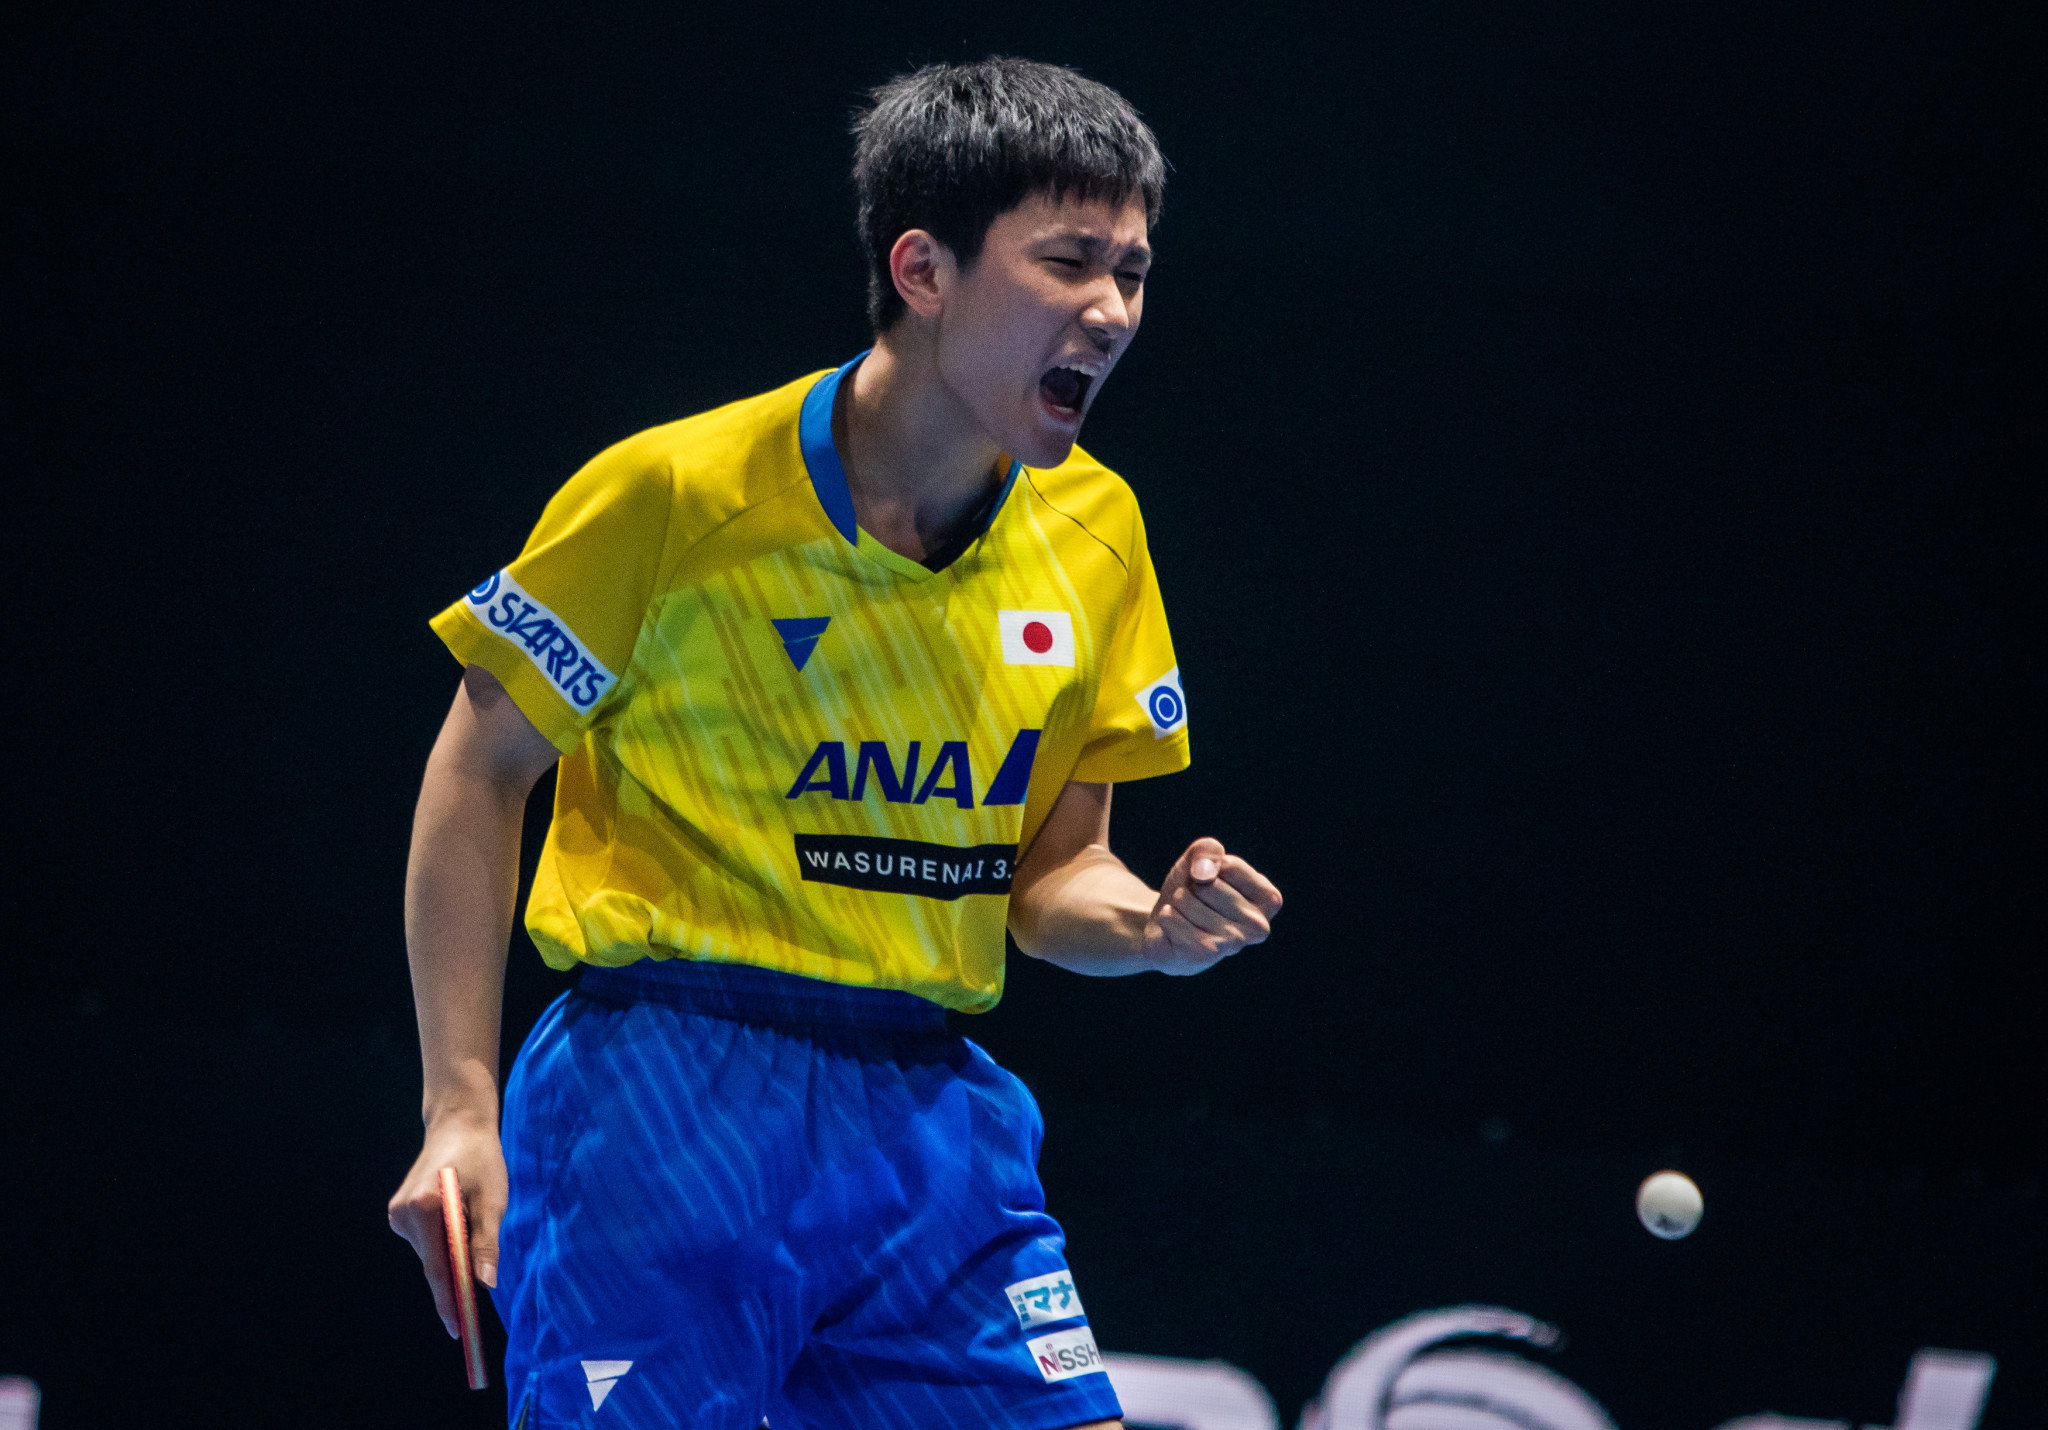 Tomokazu Harimoto certainly wasn't afraid of expressing himself as he made the semi-finals ©T2 Diamond